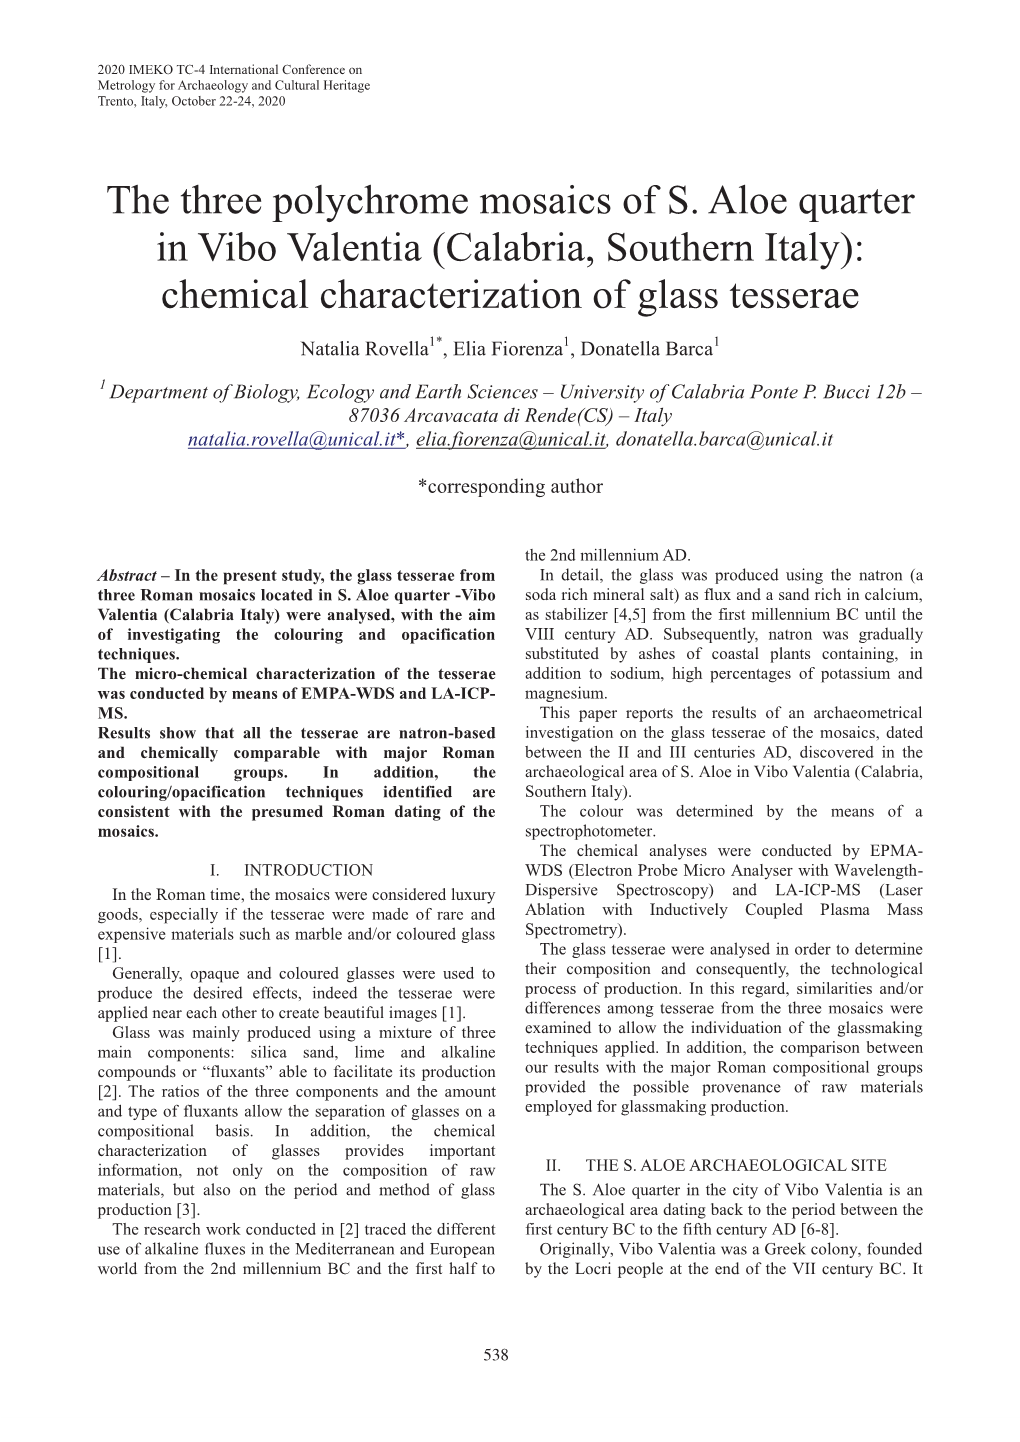 The Three Polychrome Mosaics of S. Aloe Quarter in Vibo Valentia (Calabria, Southern Italy): Chemical Characterization of Glass Tesserae